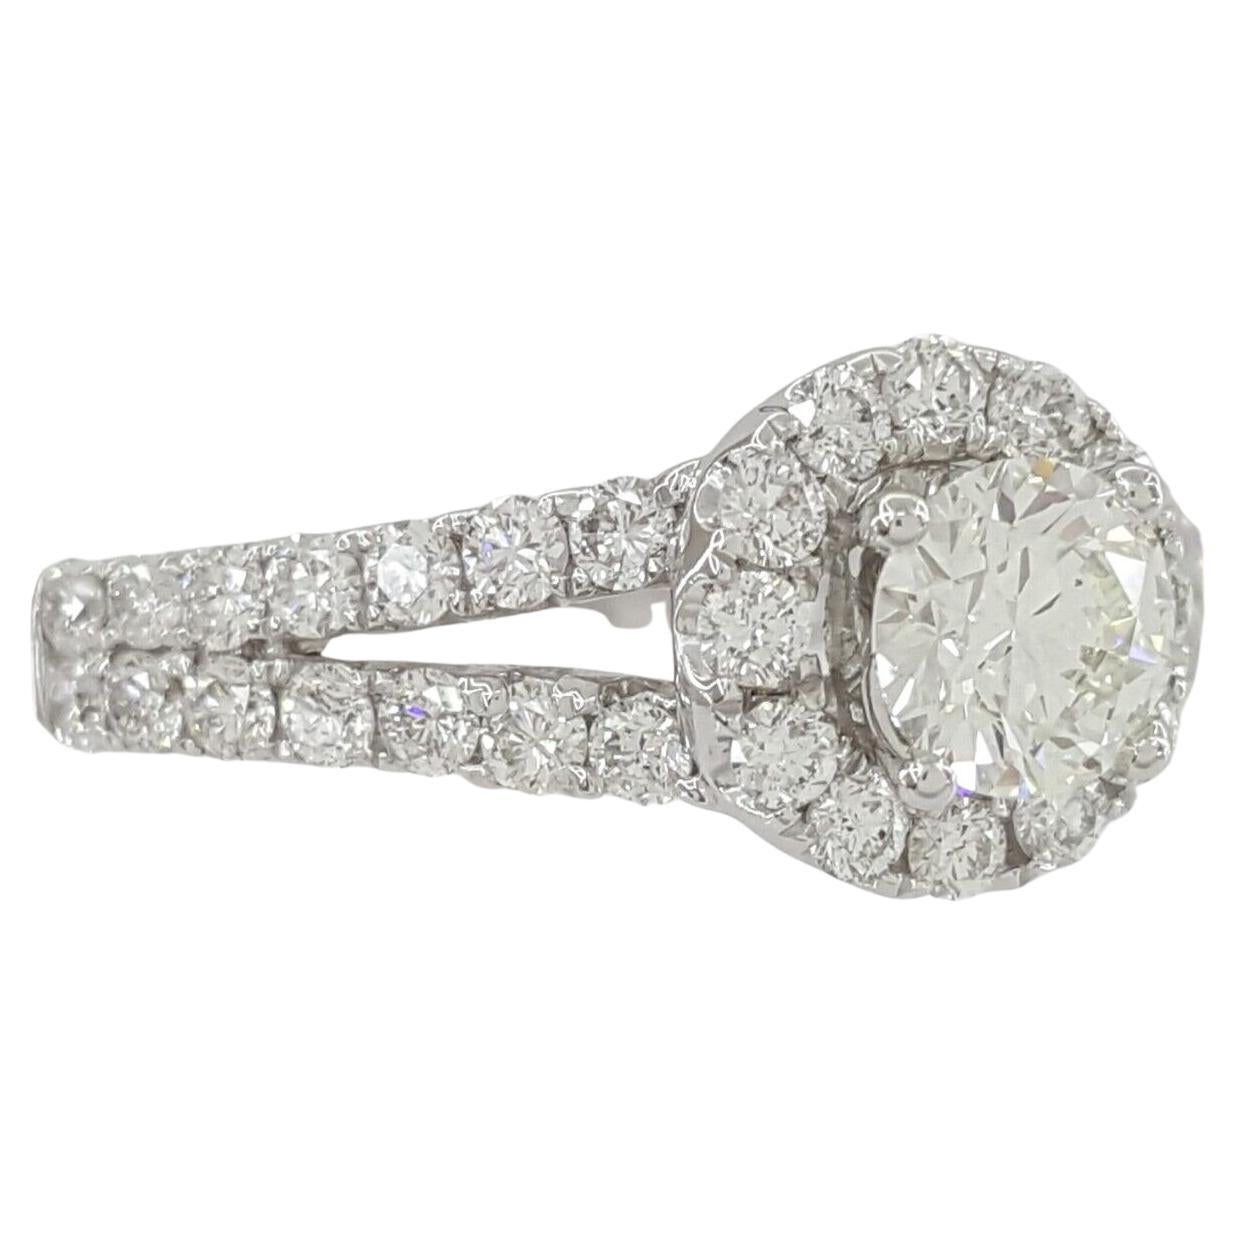 round diamond with an open pave shank that sums 1 carat in total
F color
VS clarity
